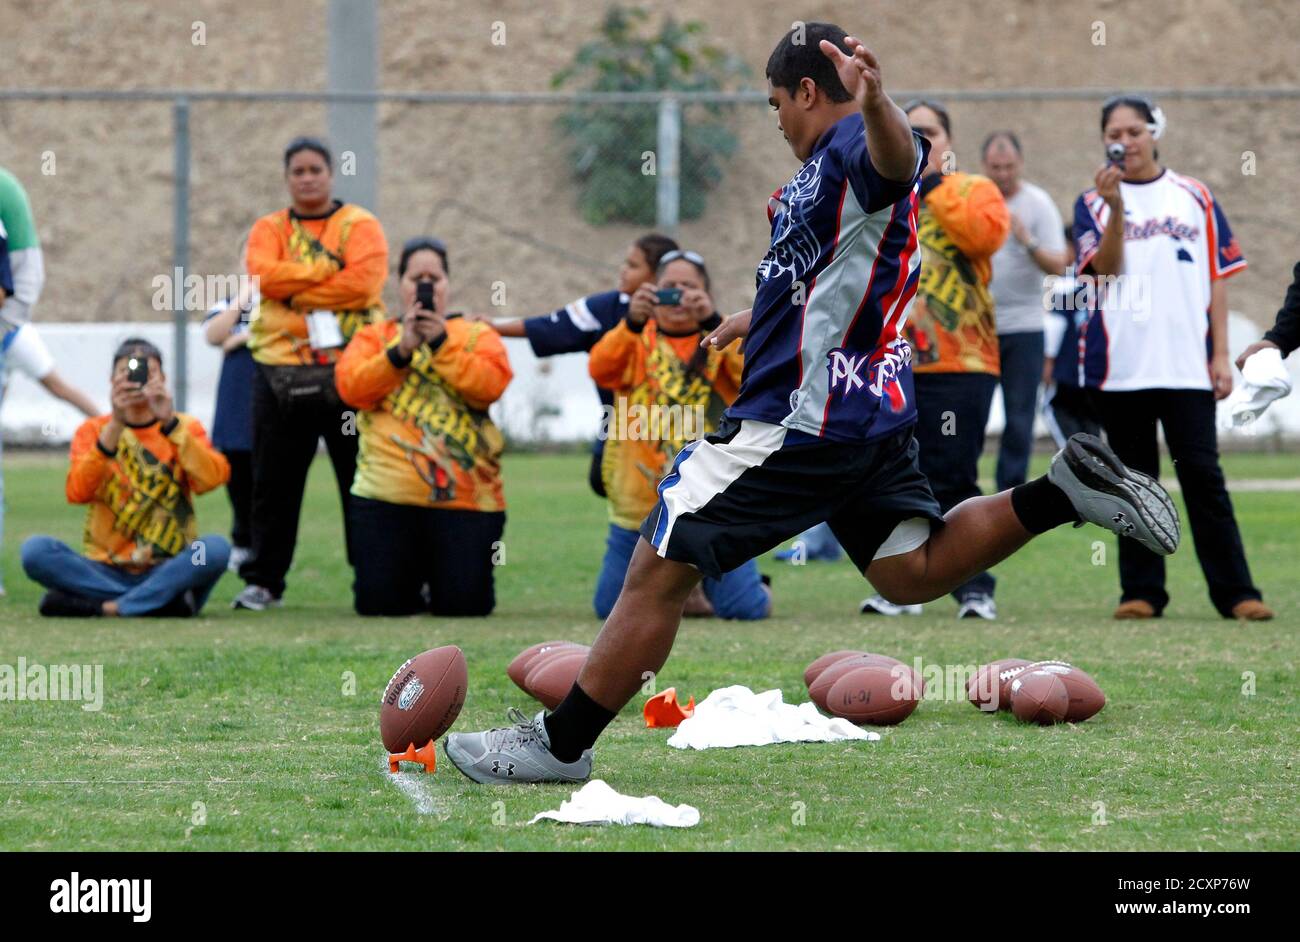 Fifteen-year-old Chelsen Victorino of Kaunakakai, Hawaii kicks the ball in the Punt, Pass & Kickk competition in front of family prior to the Cincinnati Bengals playing against the San Diego Chargers in their NFL football game in San Diego, California December 2, 2012.  Punt, Pass & Kick competition in five age gendered groups with the top scorer in each group crowned team champion, the top four scorers from all the teams compete for the National Championships to be held during an NFC playoff game.   REUTERS/Alex Gallardo (UNITED STATES - Tags: SPORT FOOTBALL) Stock Photo